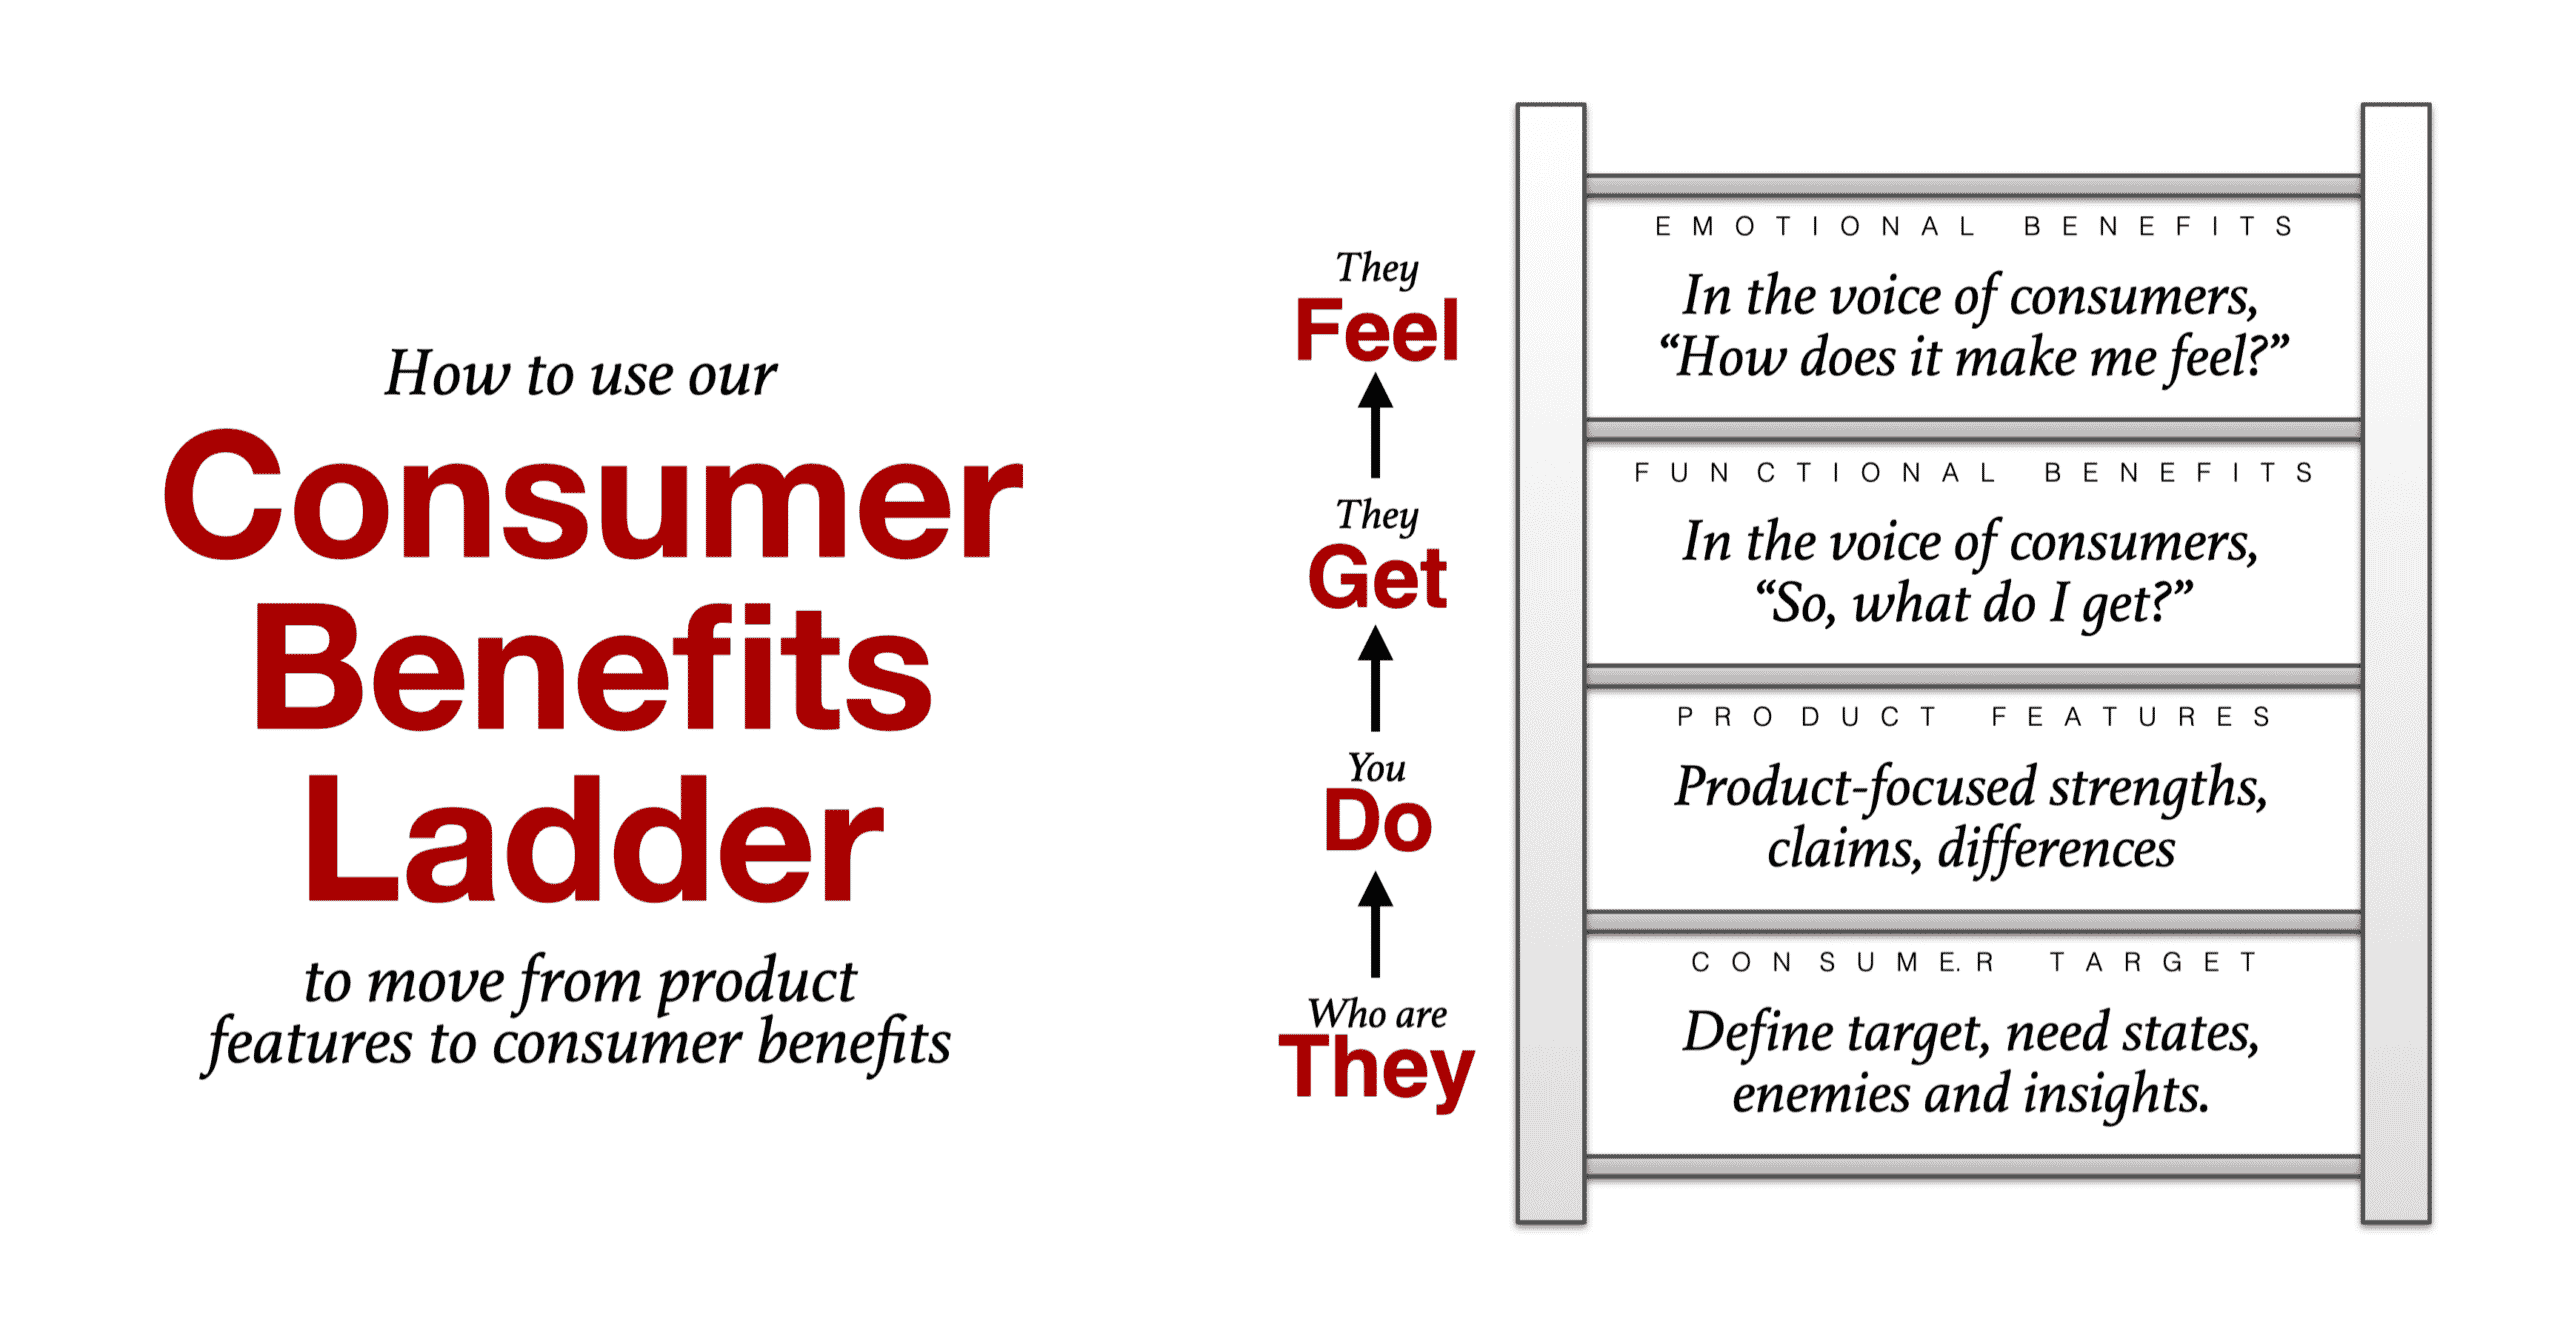 Consumer Benefits ladder to help differentiate your brand positioning statement